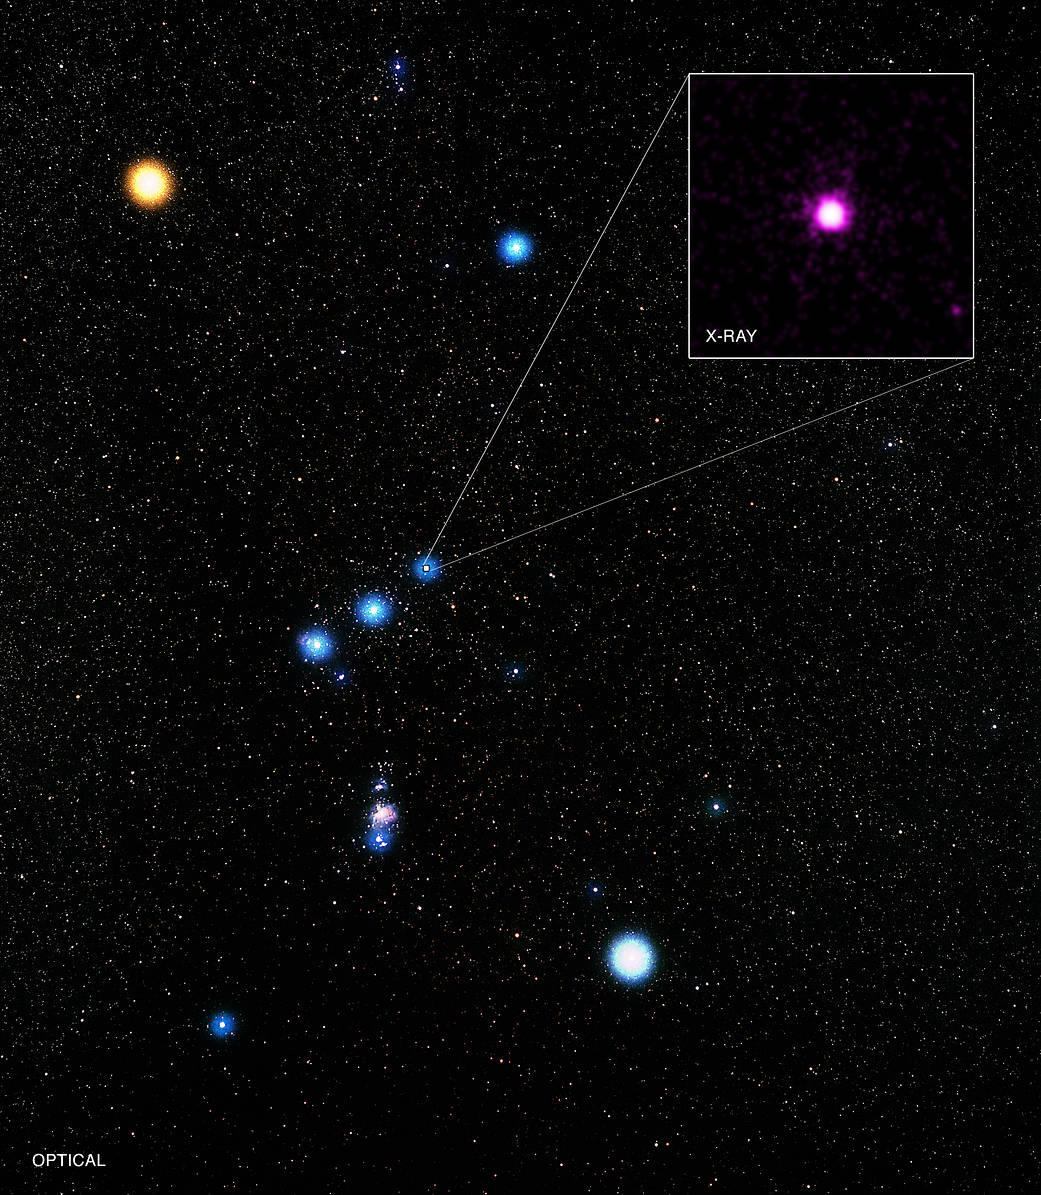 On an inky background dotted with tiny white stars, the stars of the Orion constellation shine brightly in this image. Three small blue balls are lined up near the center of the image at an angle up to the right; these represent the belt of Orion. Four stars form a tall rectangle that enclose the belt. The top left star is a large yellow ball, the upper right stars is a smaller blue ball, about the same size as each of the belt stars. The lower right star is a large white ball with a faint blue edge. And the lower left star is a small blue ball. Also visible is a smudge of pink and blue below the central star of the belt. In inset box is called out from the rightmost star of the belt with a X-ray image of the star shown as a white ball with purple feathered edges. The photo is watermarked with “Optical” in the lower left corner and “X-ray” in the inset.